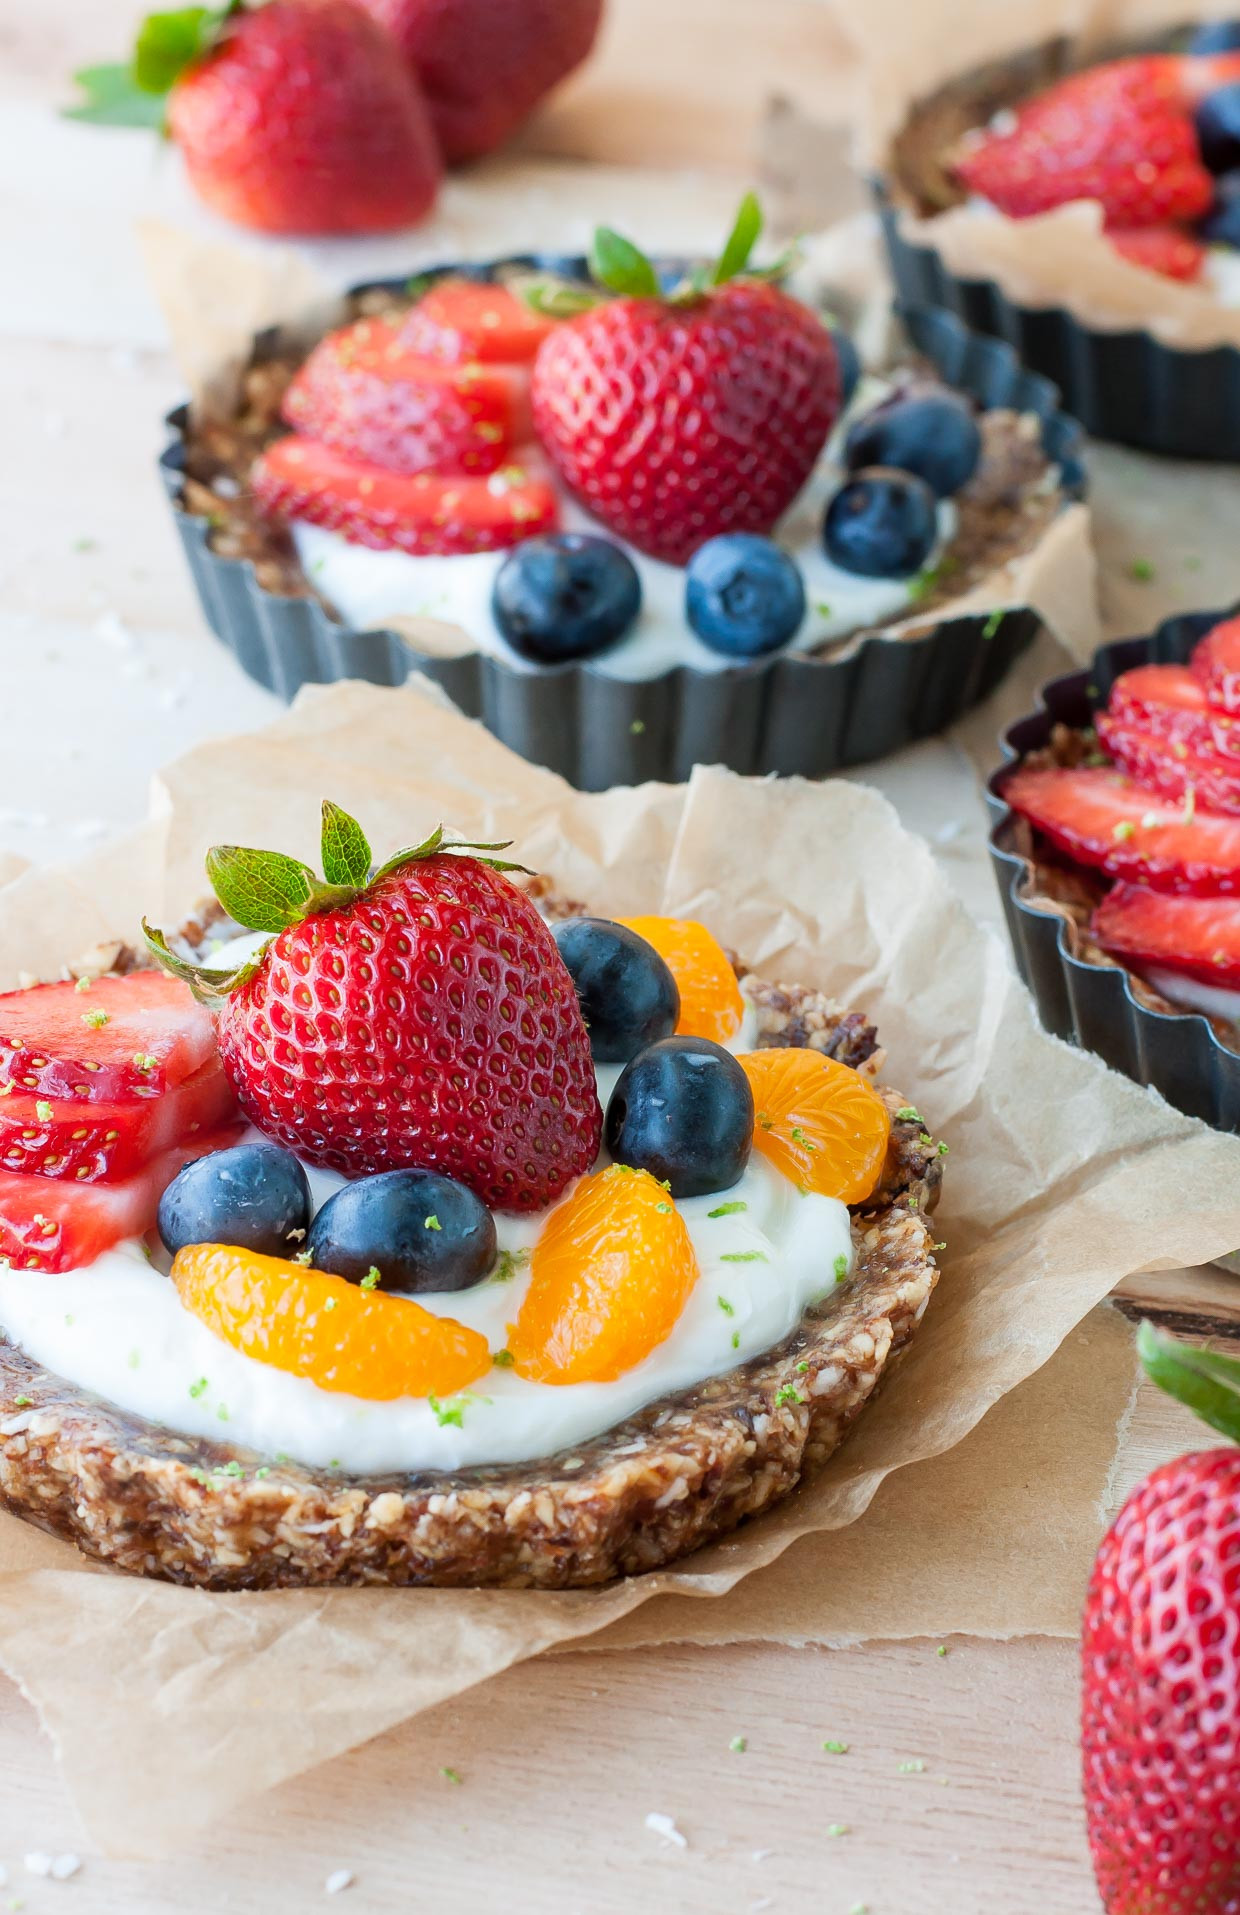 Healthy No Bake Desserts
 Healthy No Bake Coconut Lime Tarts with Fruit and Yogurt